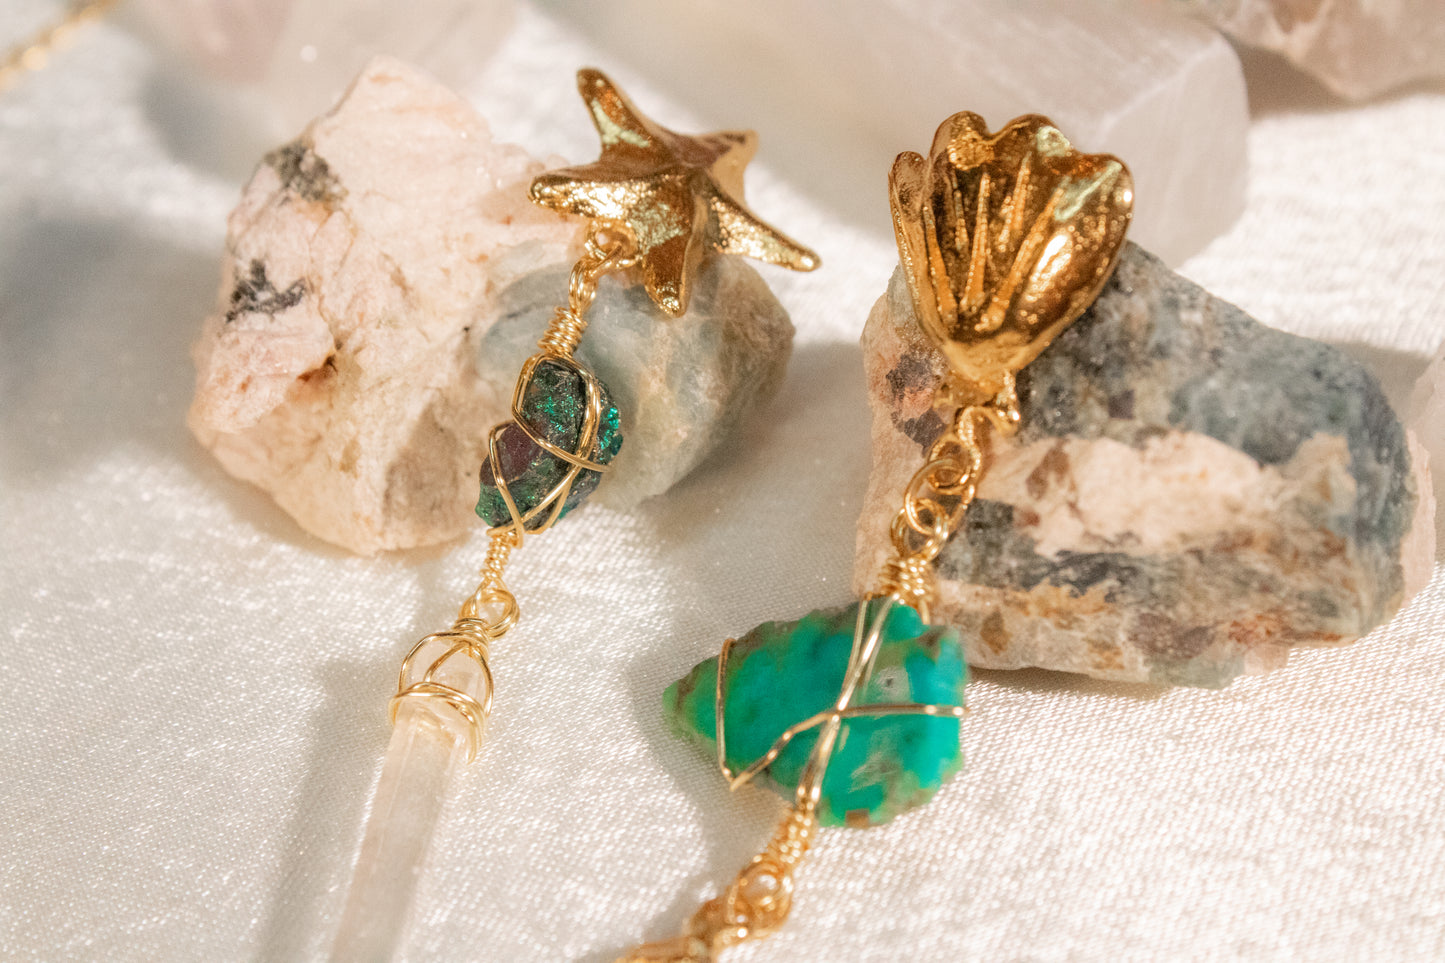 Axochitl. Earrings with turquoise, chalcopyrite and white quartz